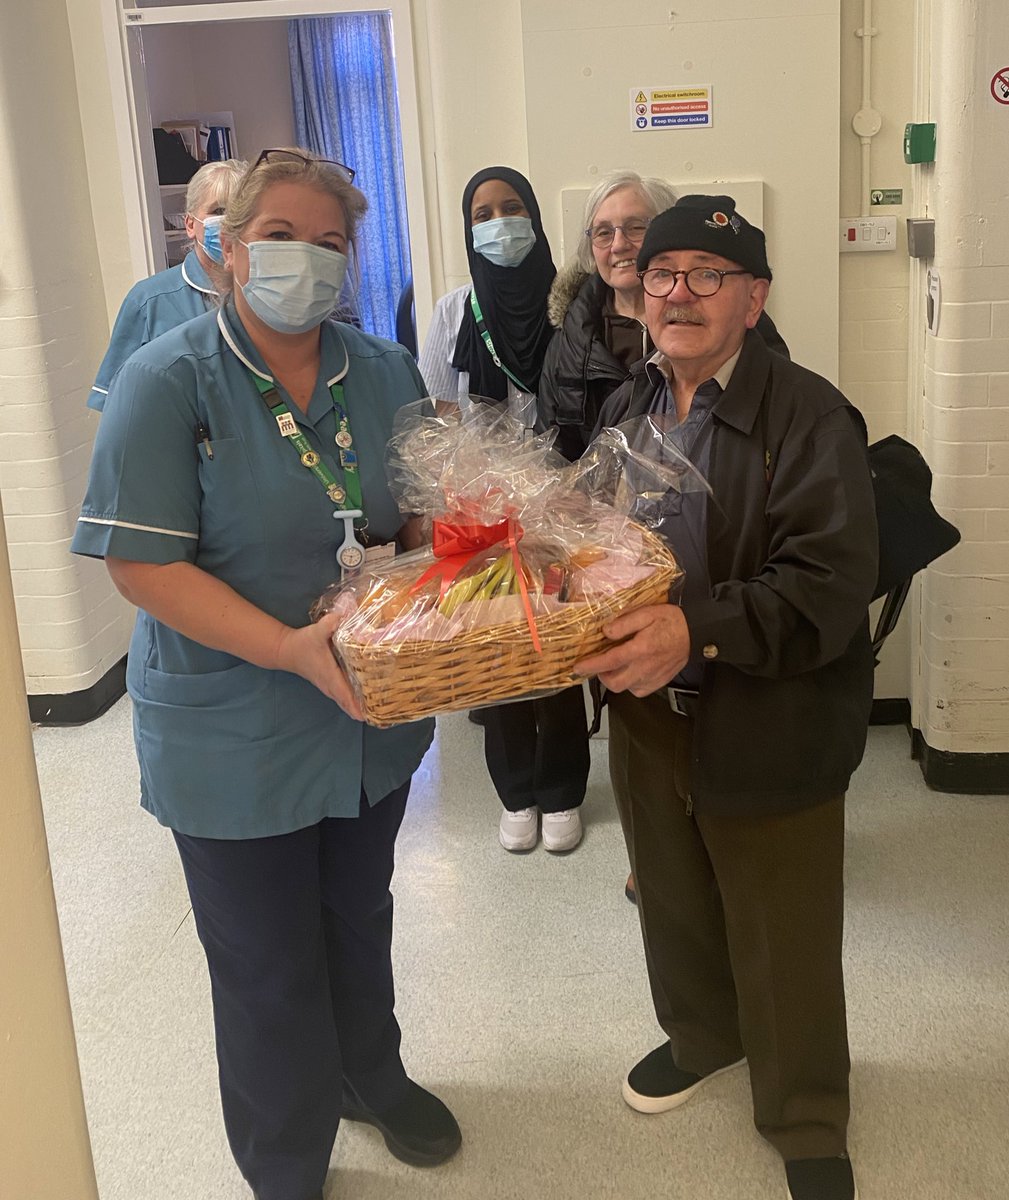 How lovely when a patient and his wife comes back to elective orthopaedics pre op with a gift for the staff to say thank you for the amazing service @TeamNUH @NUHSurgery